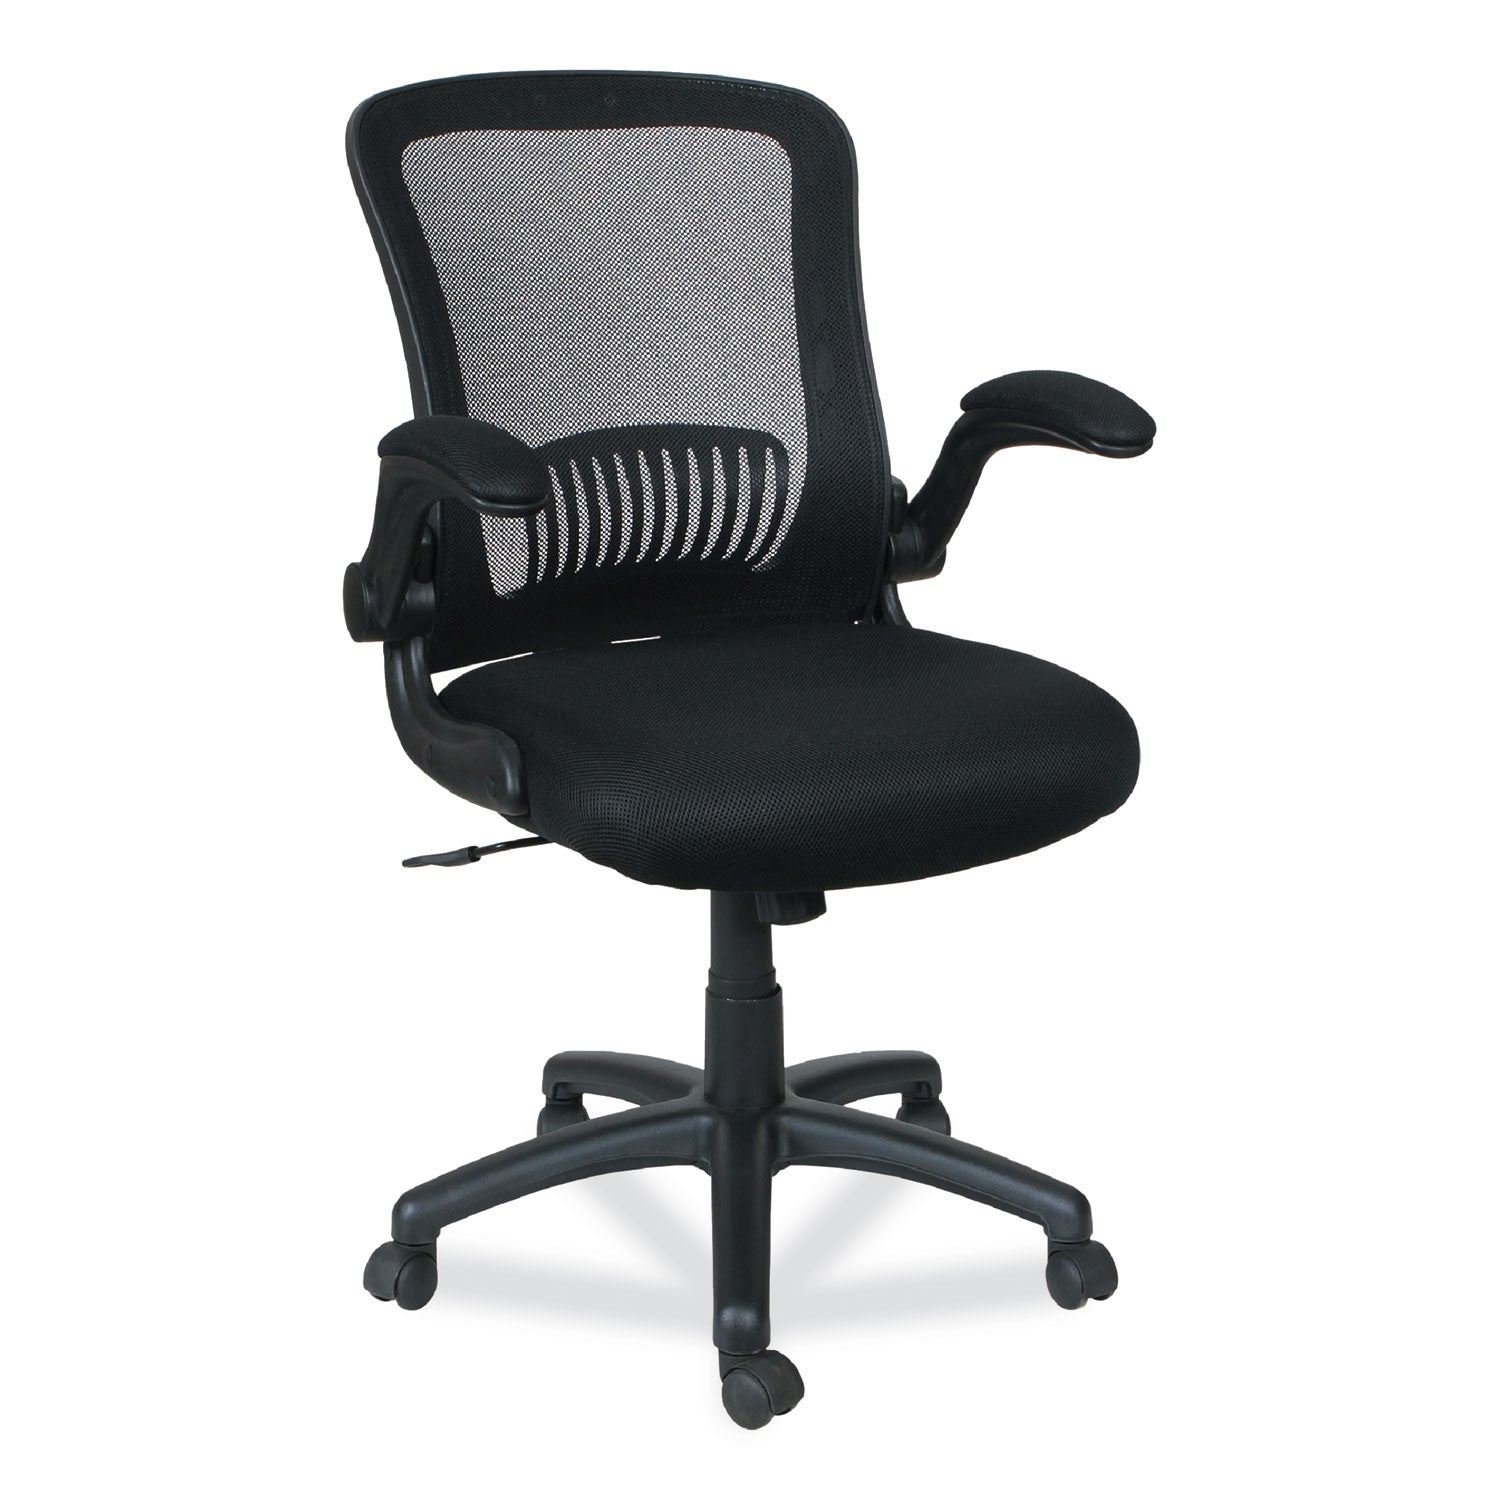 alera-eb-e-series-swivel-tilt-mid-back-mesh-chair-supports-up-to-275-lb-1811-to-2204-seat-height-black_aleebe4217 - 1